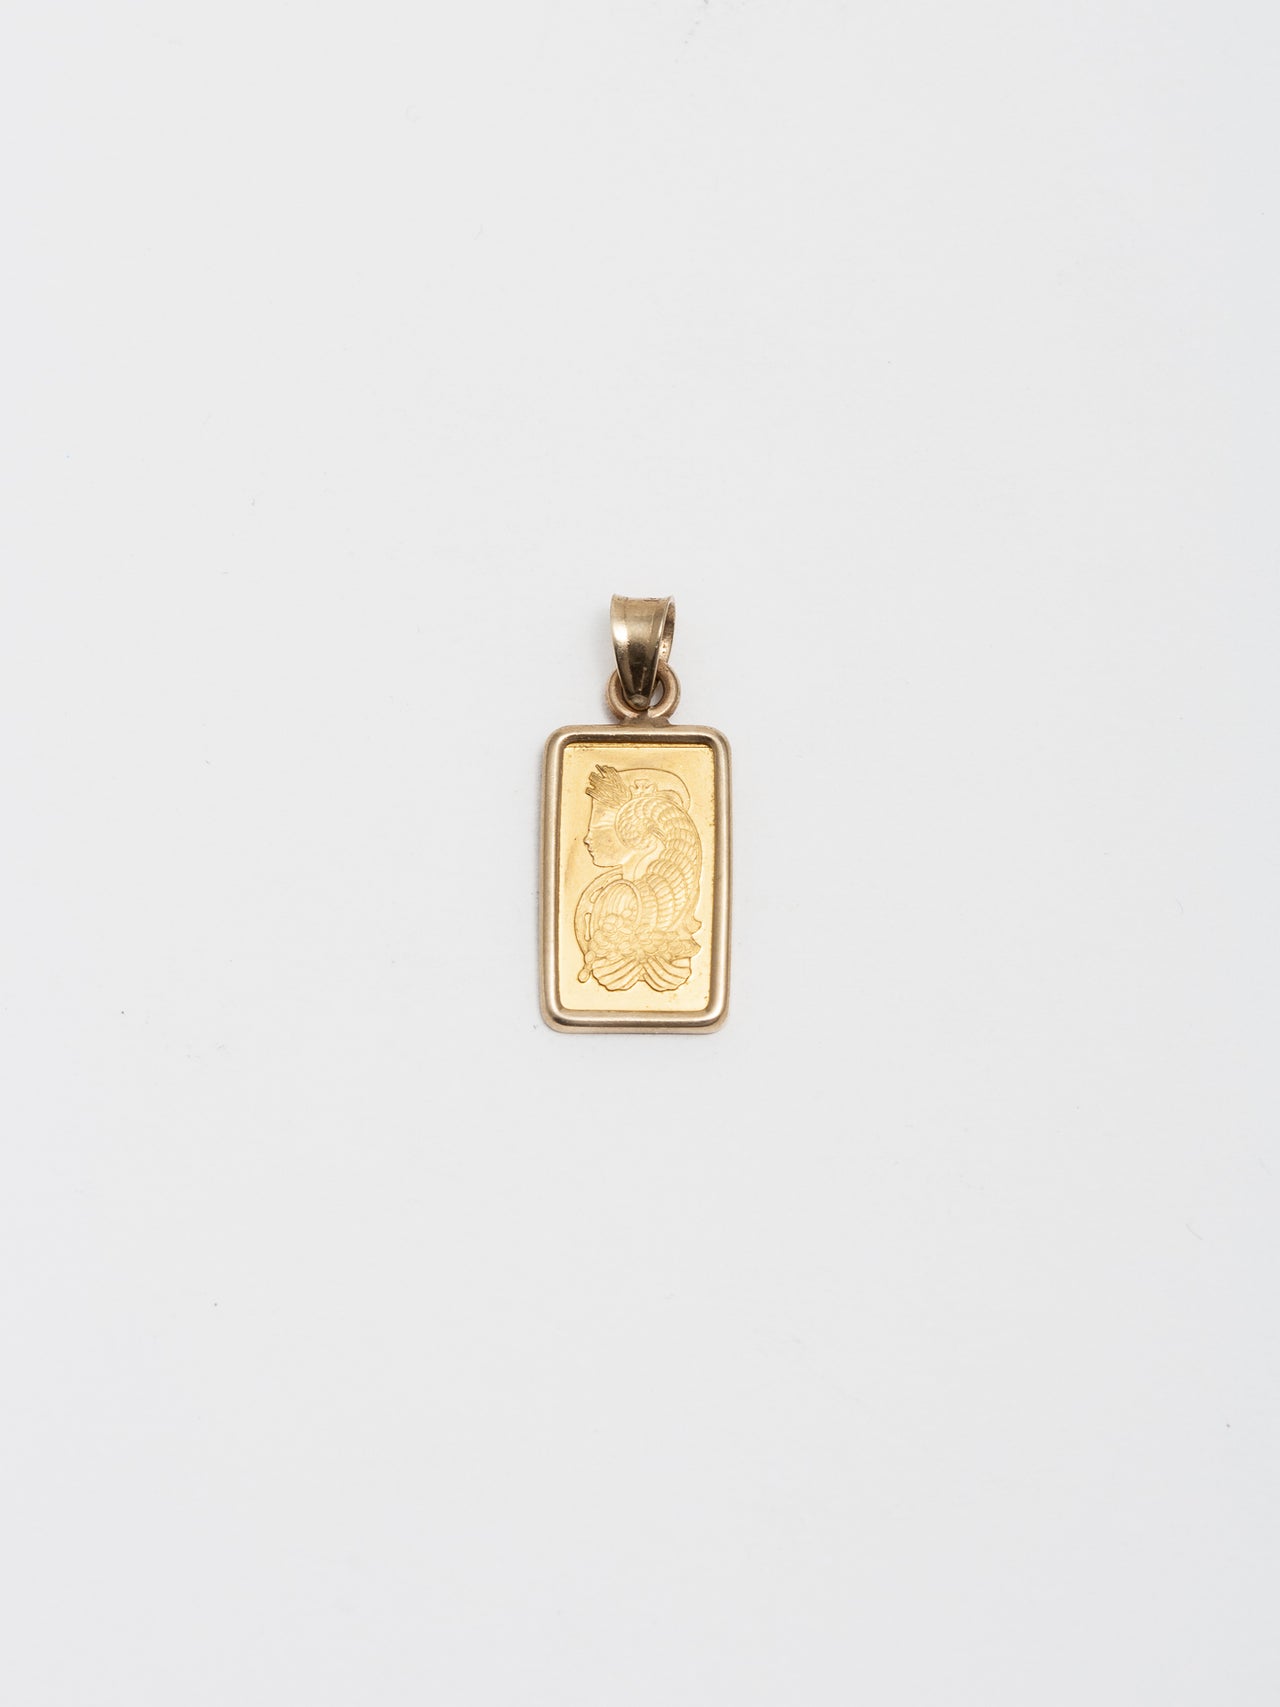 Lady Fortuna Coin Pendant - Vintage Capsule